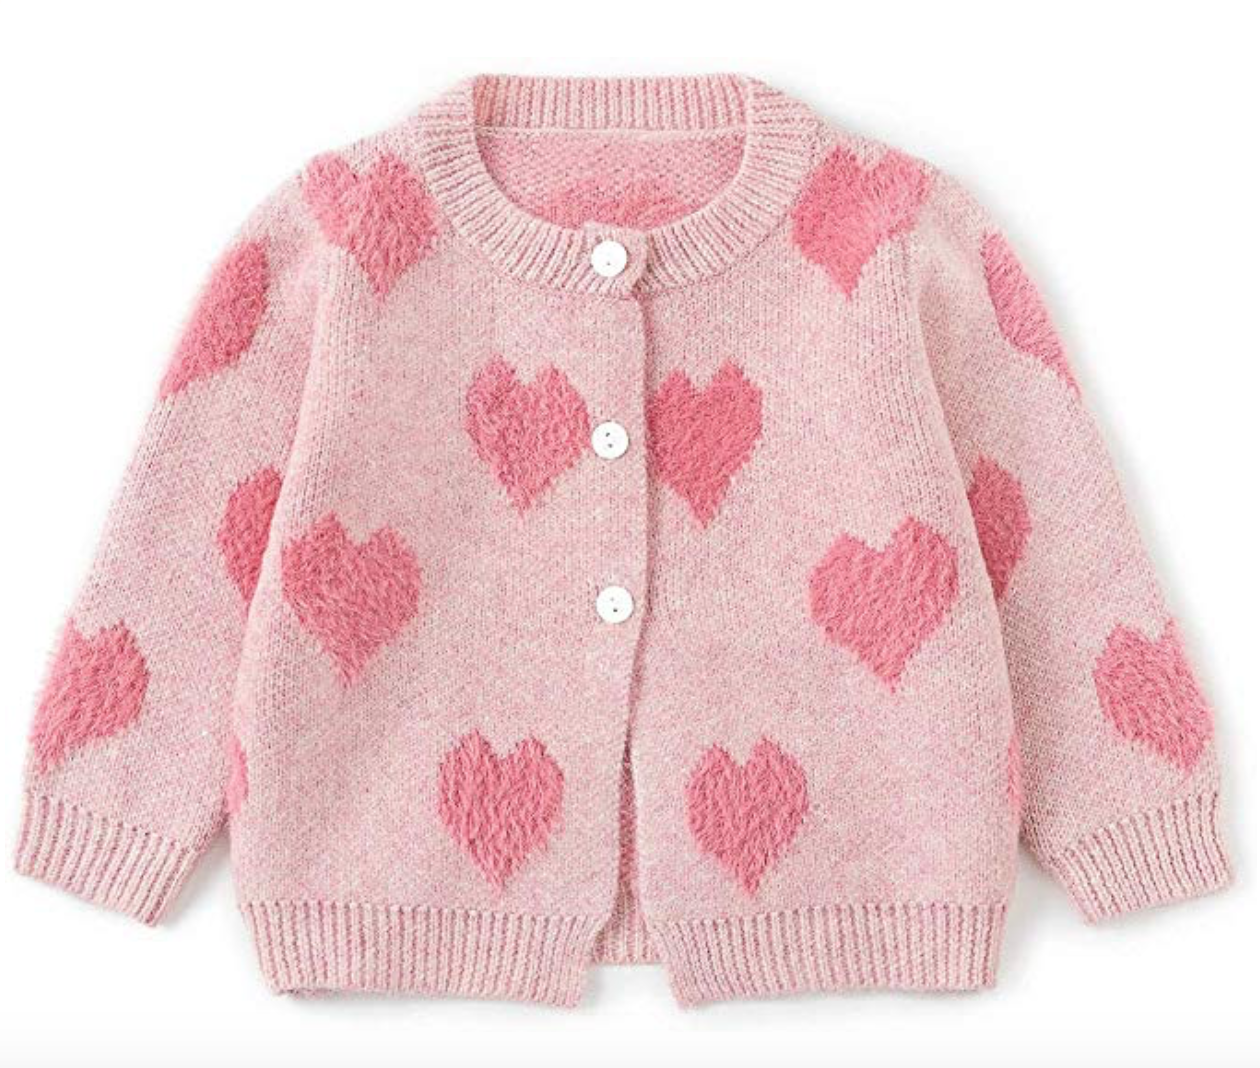 Girl Kids Winter Coat Knite Sweater Baby Knitwear Pullover Tops Sleeve Clothes 